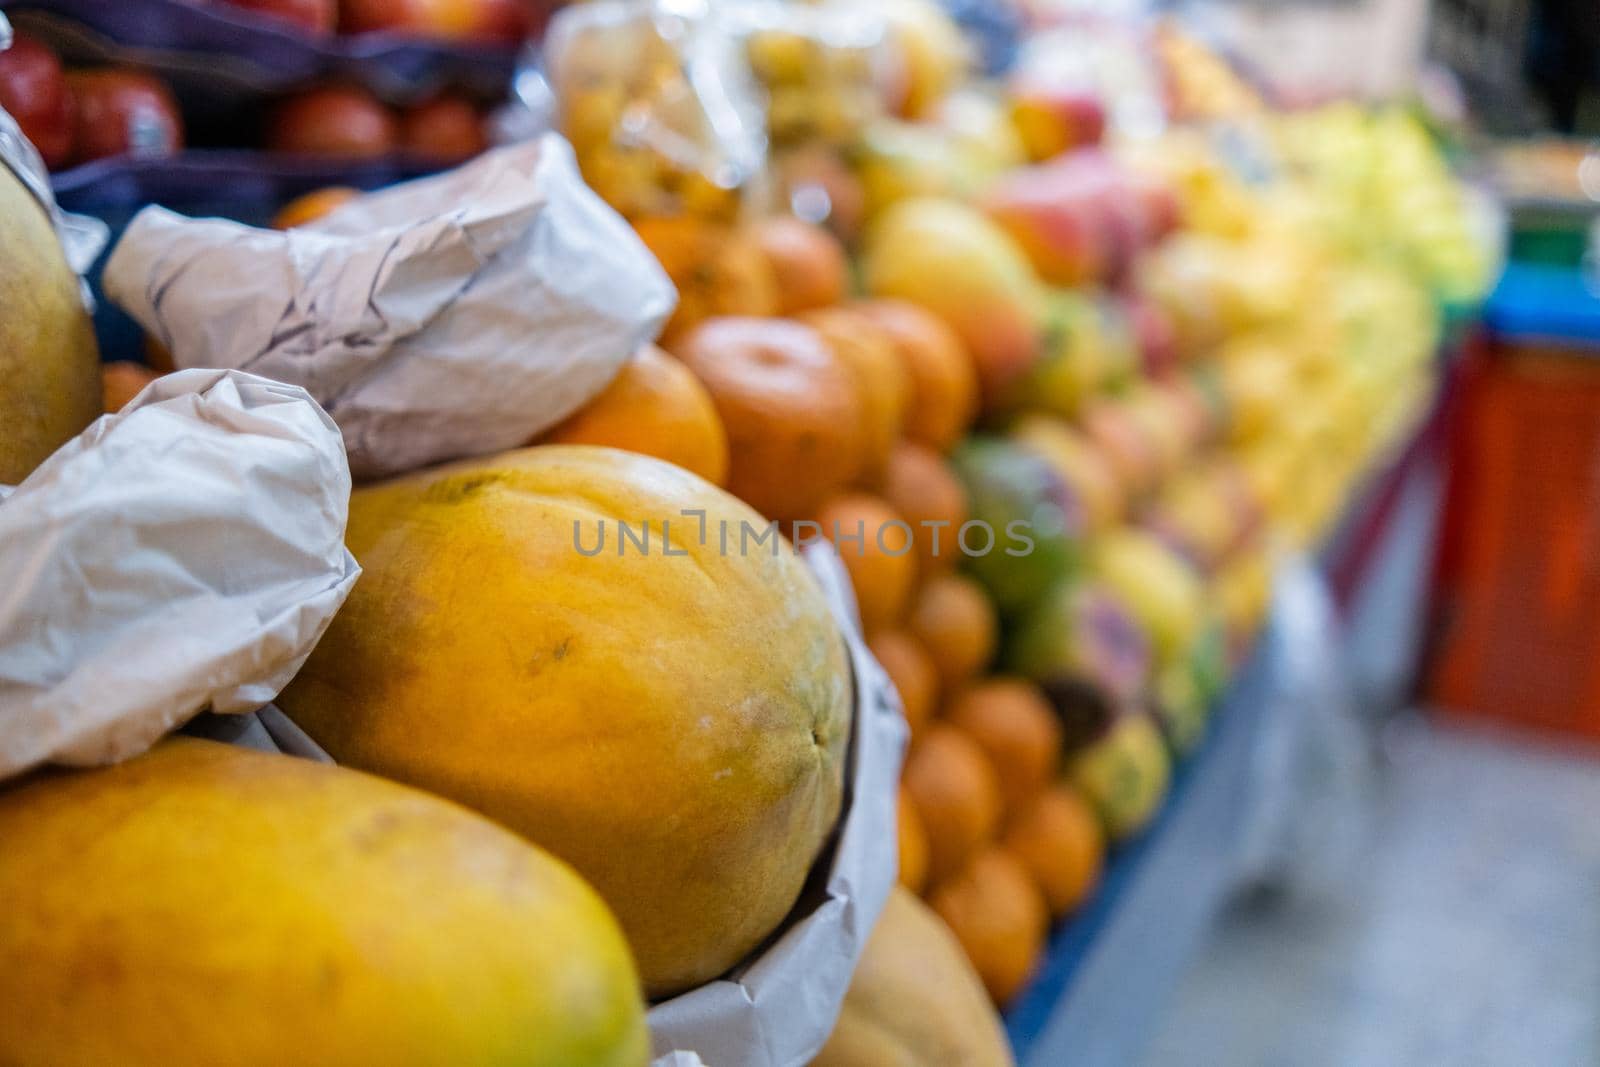 Colorful fruit stand with fresh papayas, tangerines, apples, mangoes, and more. Close-up of juicy-looking fruit for sale on stall inside classic Mexican market with blurry background. Healthy food